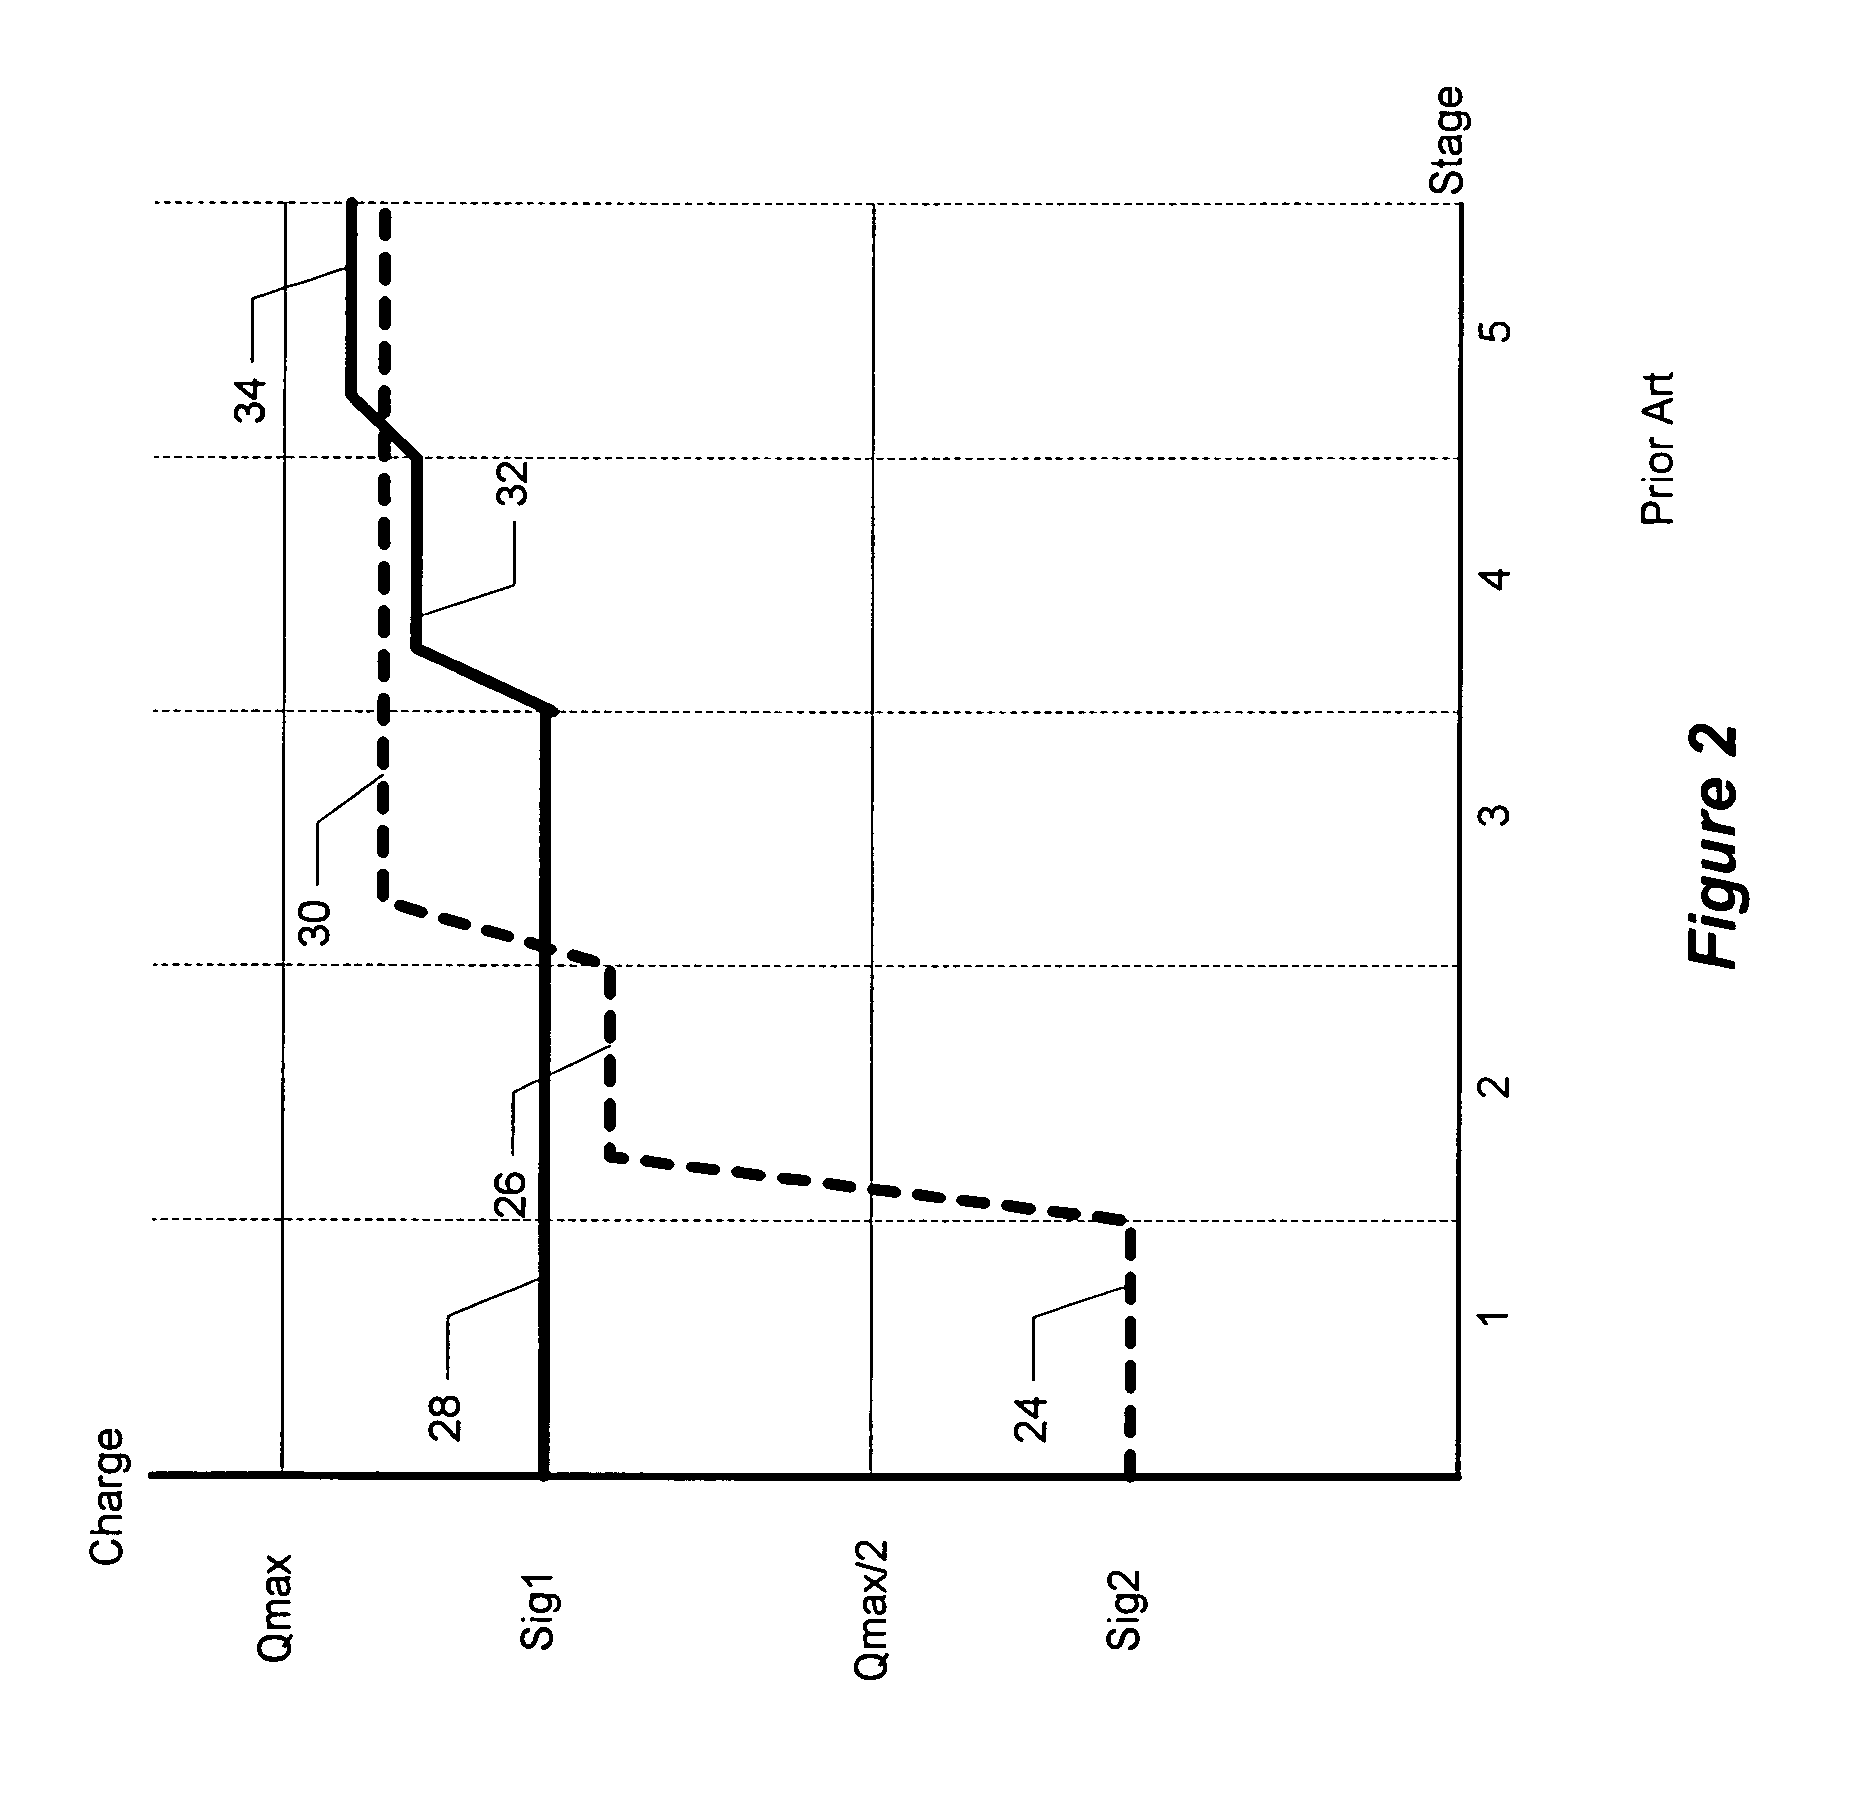 Sub-ranging pipelined charge-domain analog-to-digital converter with improved resolution and reduced power consumption